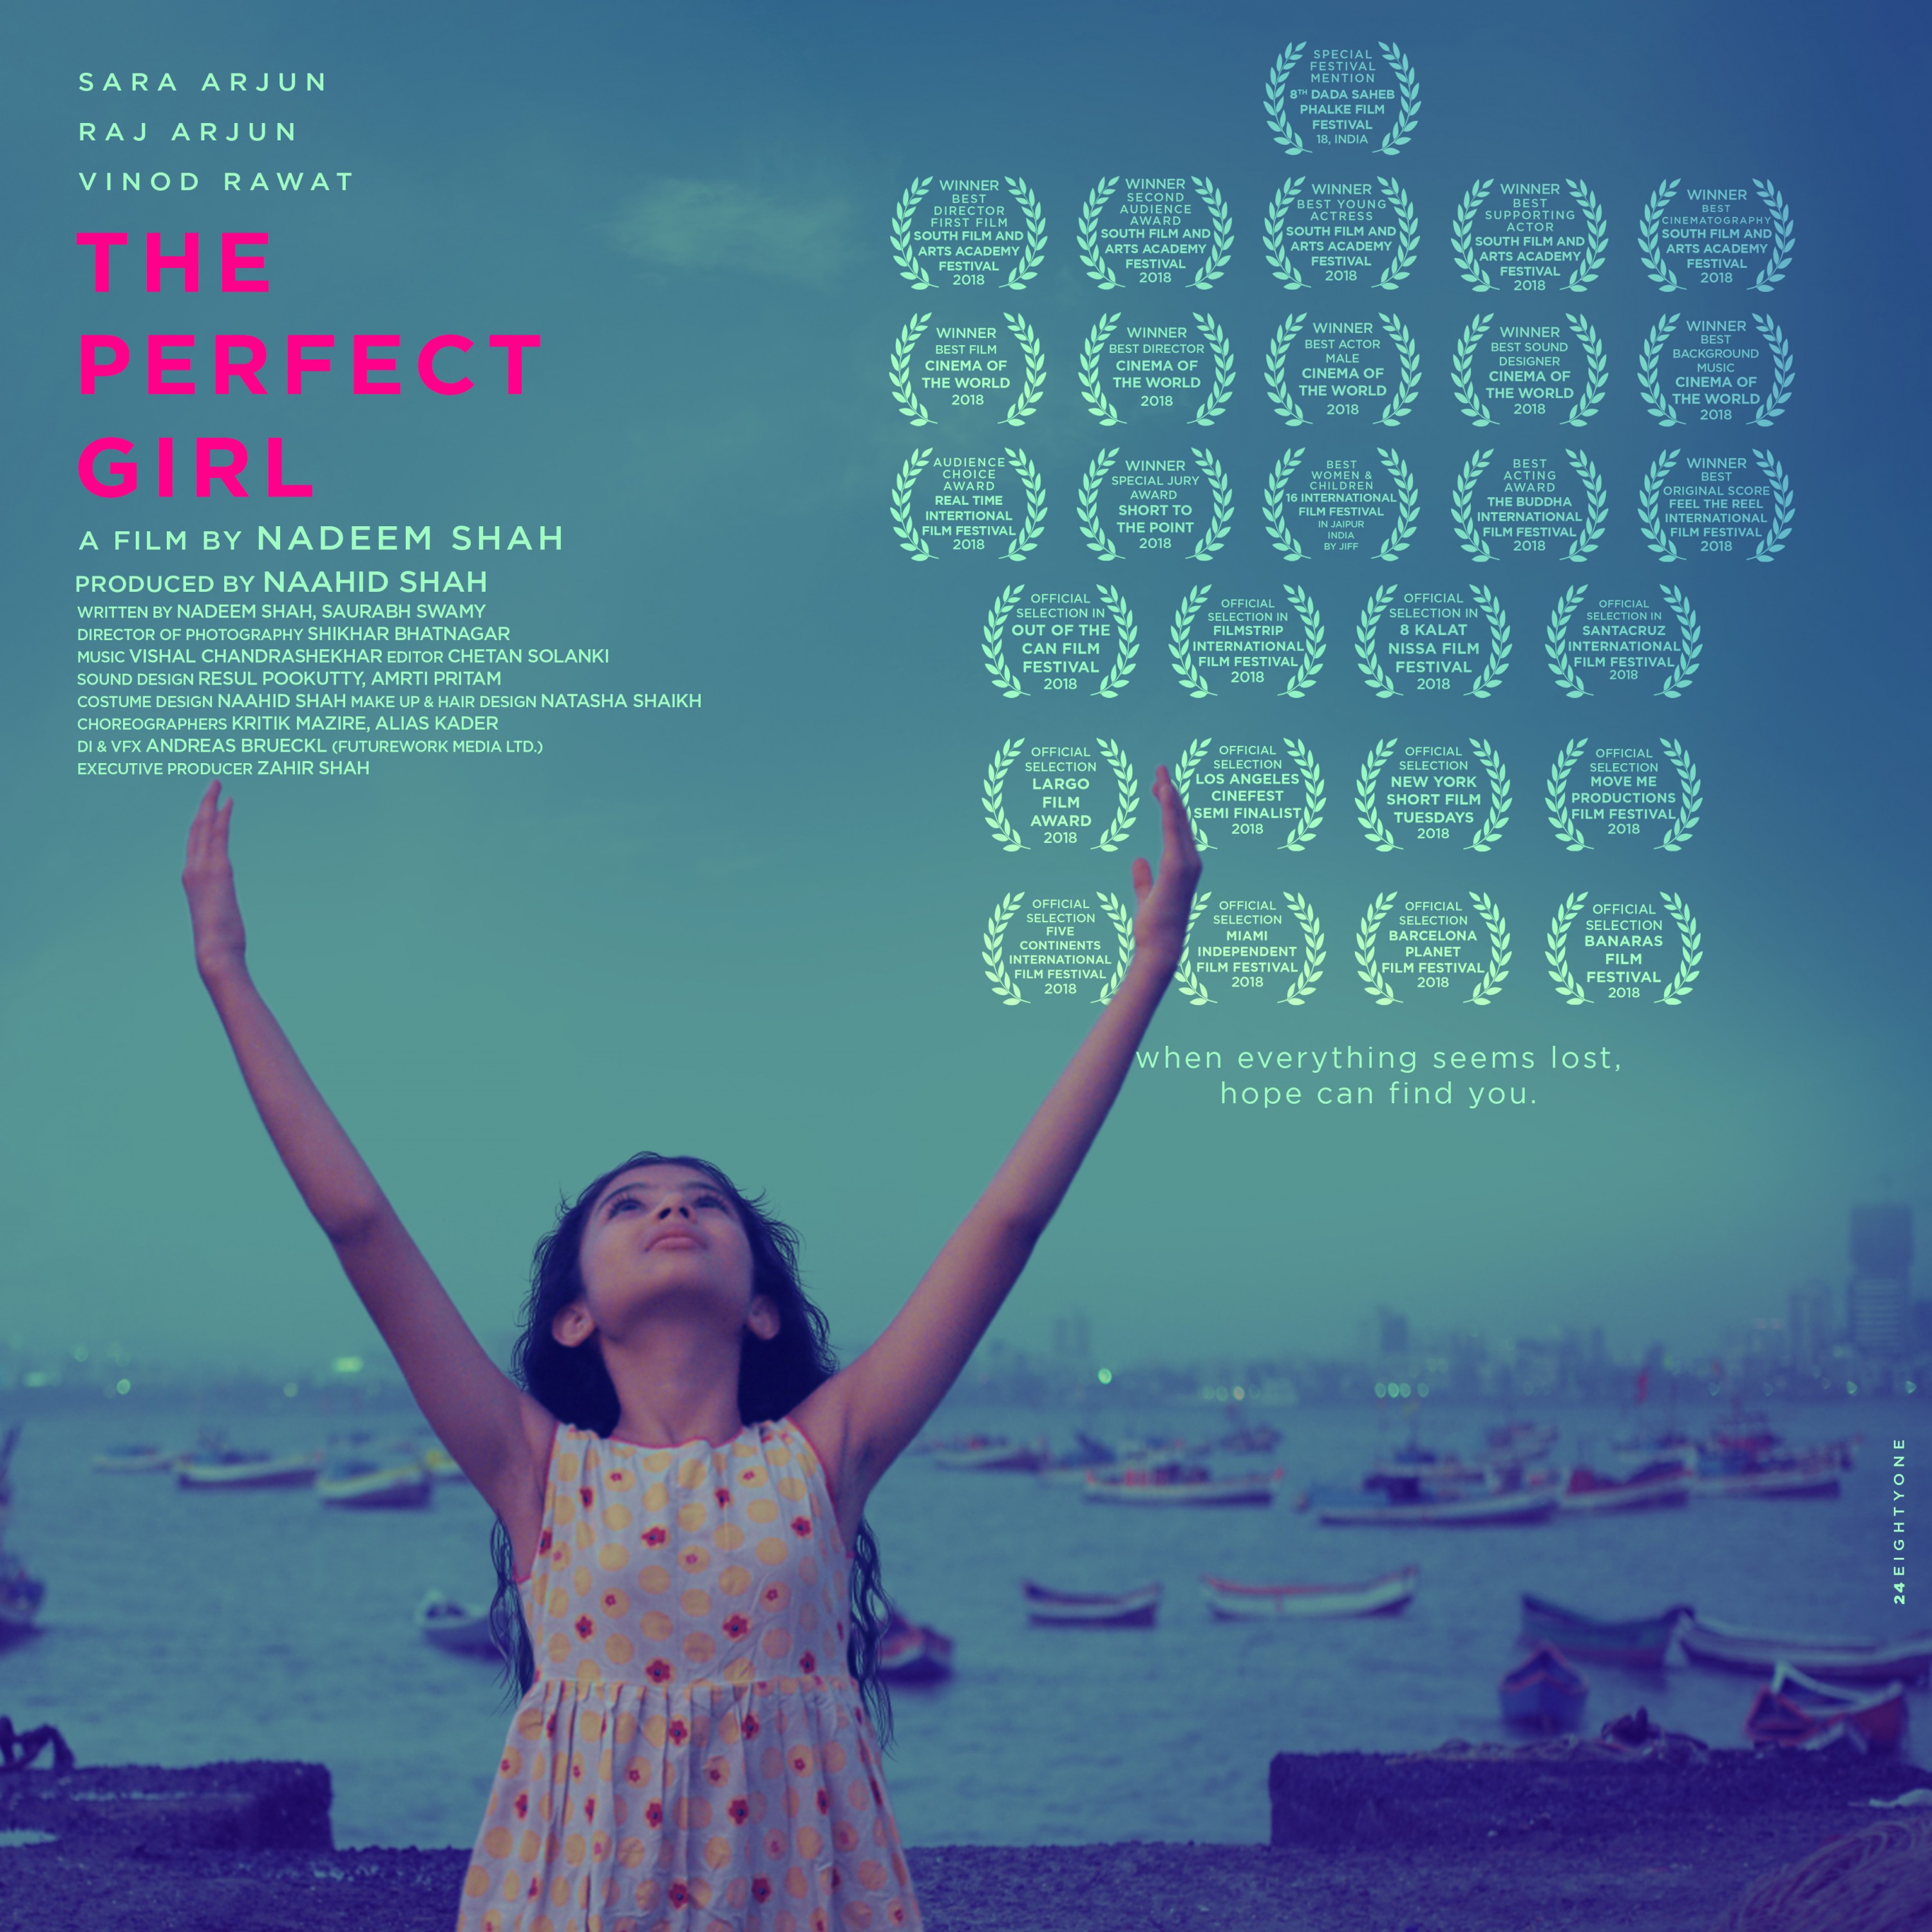 Mega Sized Movie Poster Image for The Perfect Girl